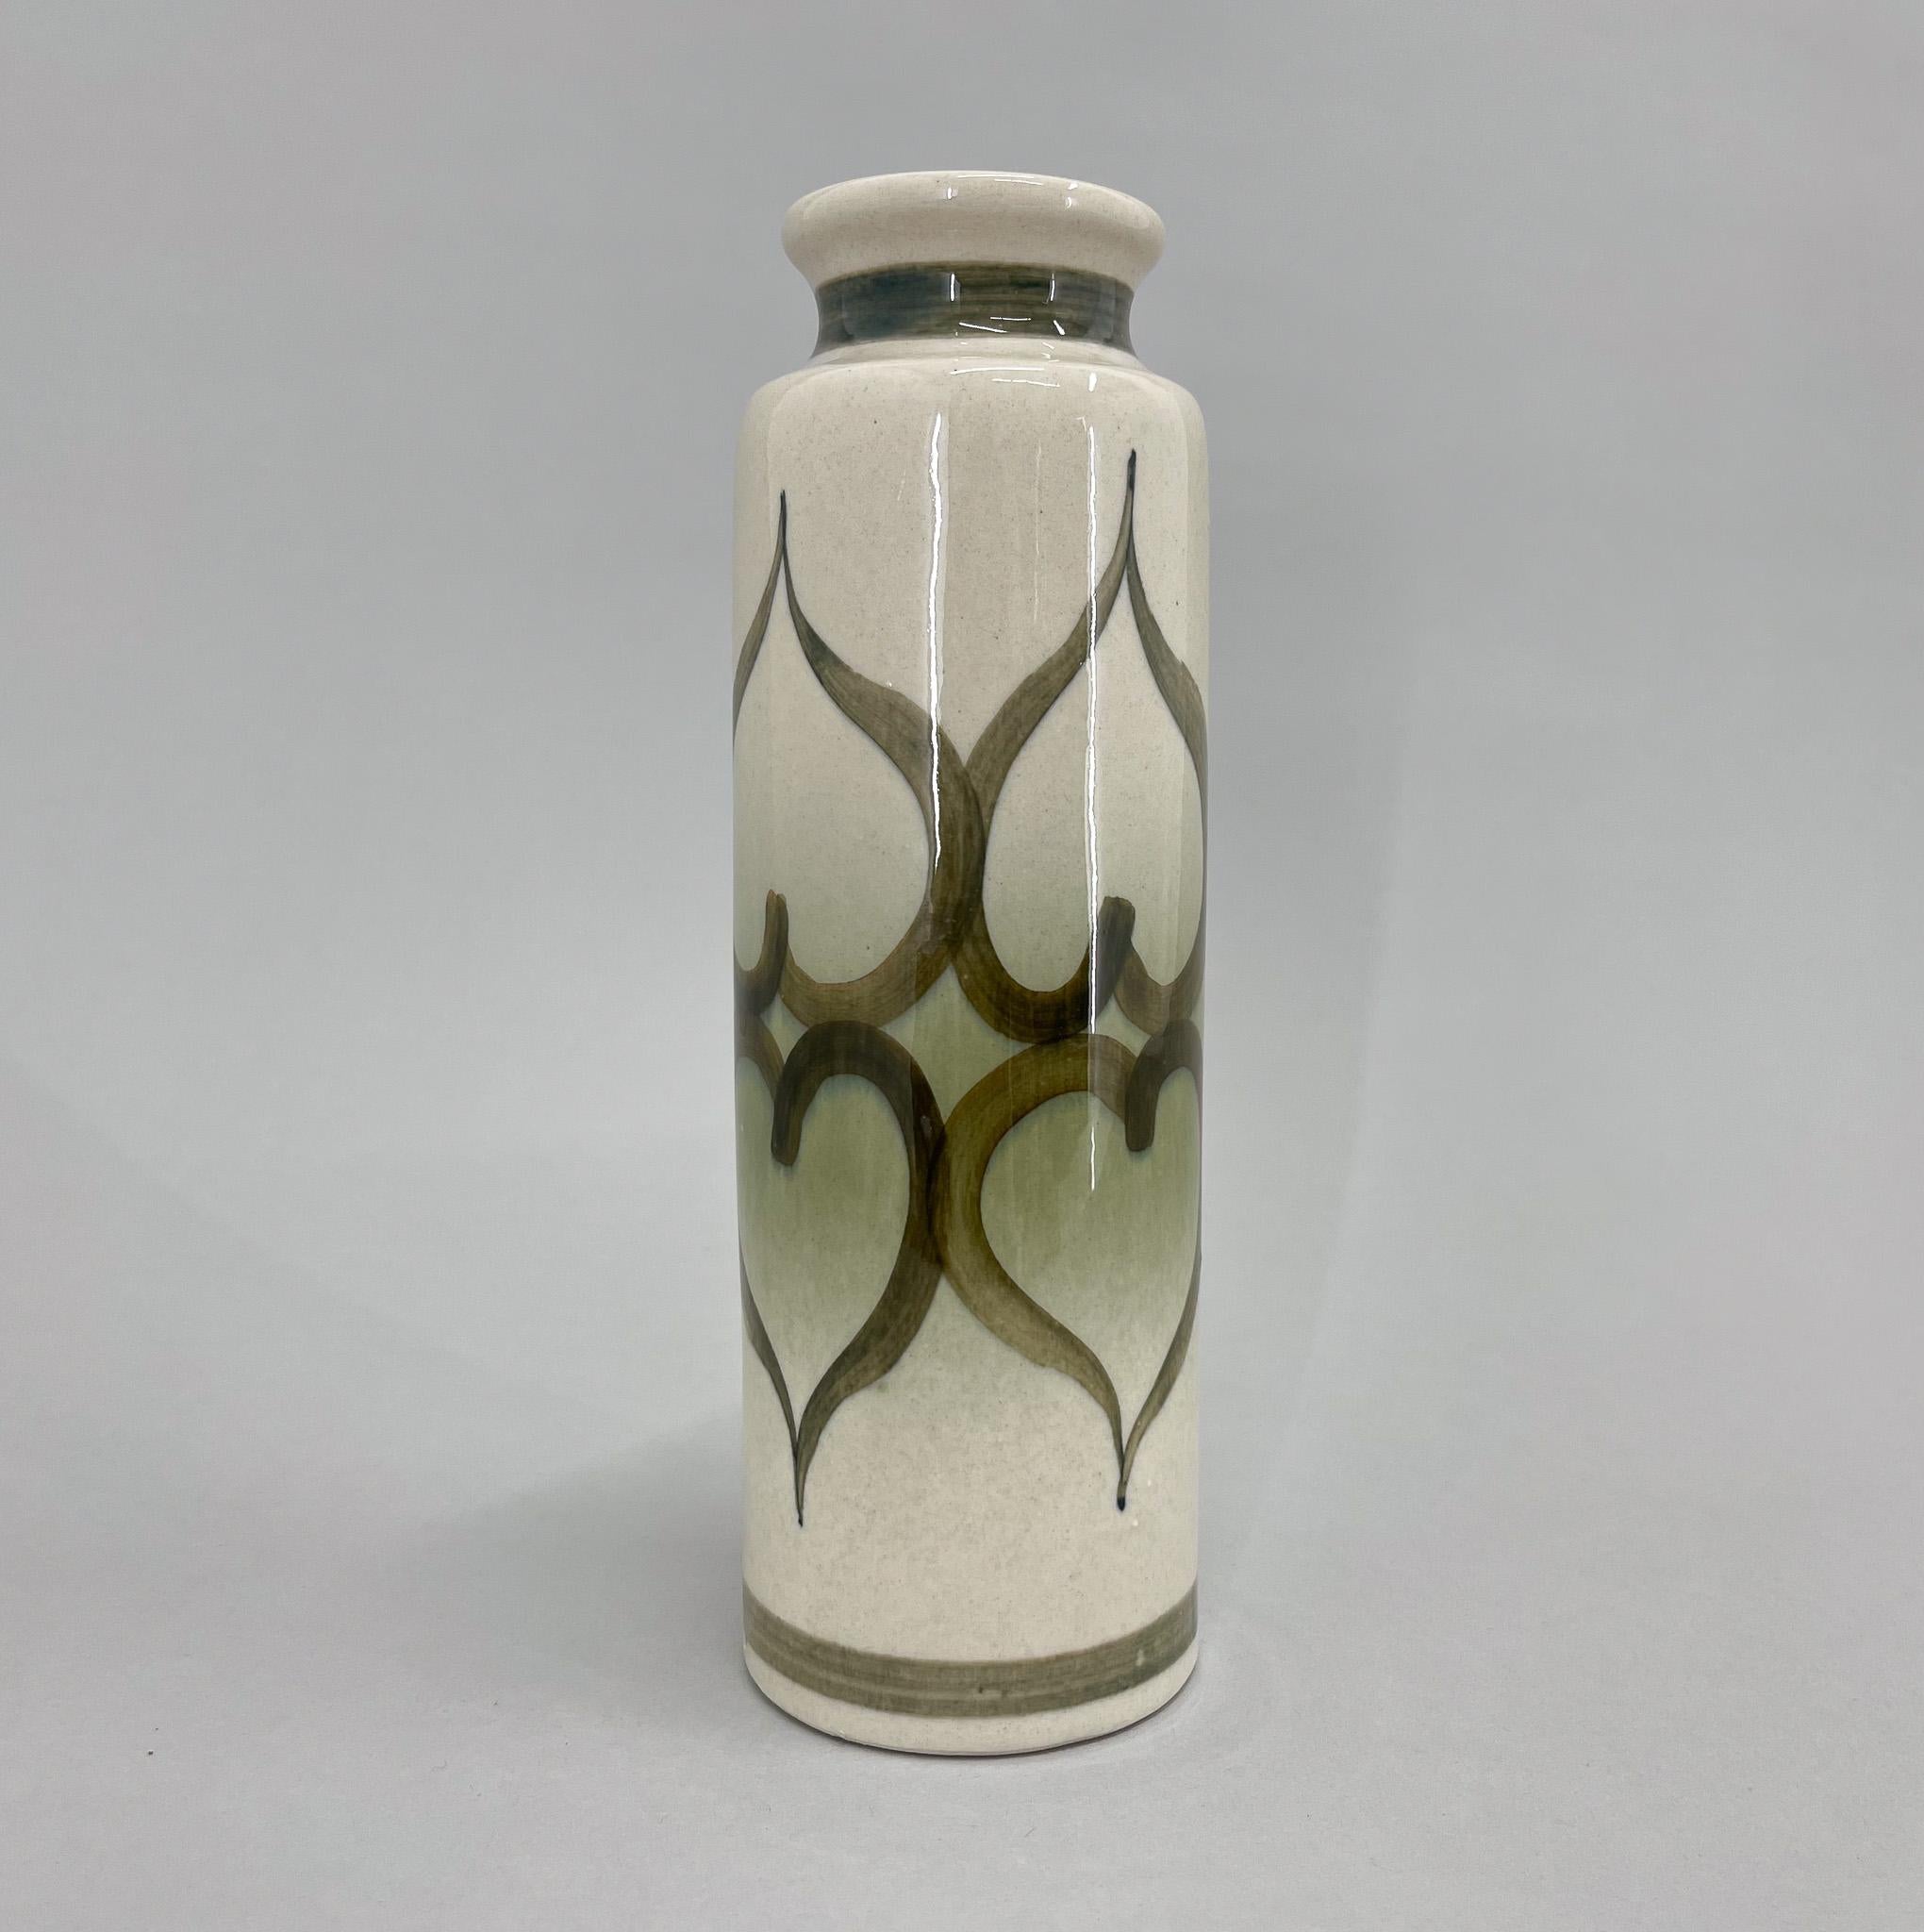 Vintage ceramic vase produced by Ditmar Urbach in former Czechoslovakia in the 1970's. Good vintage condition.